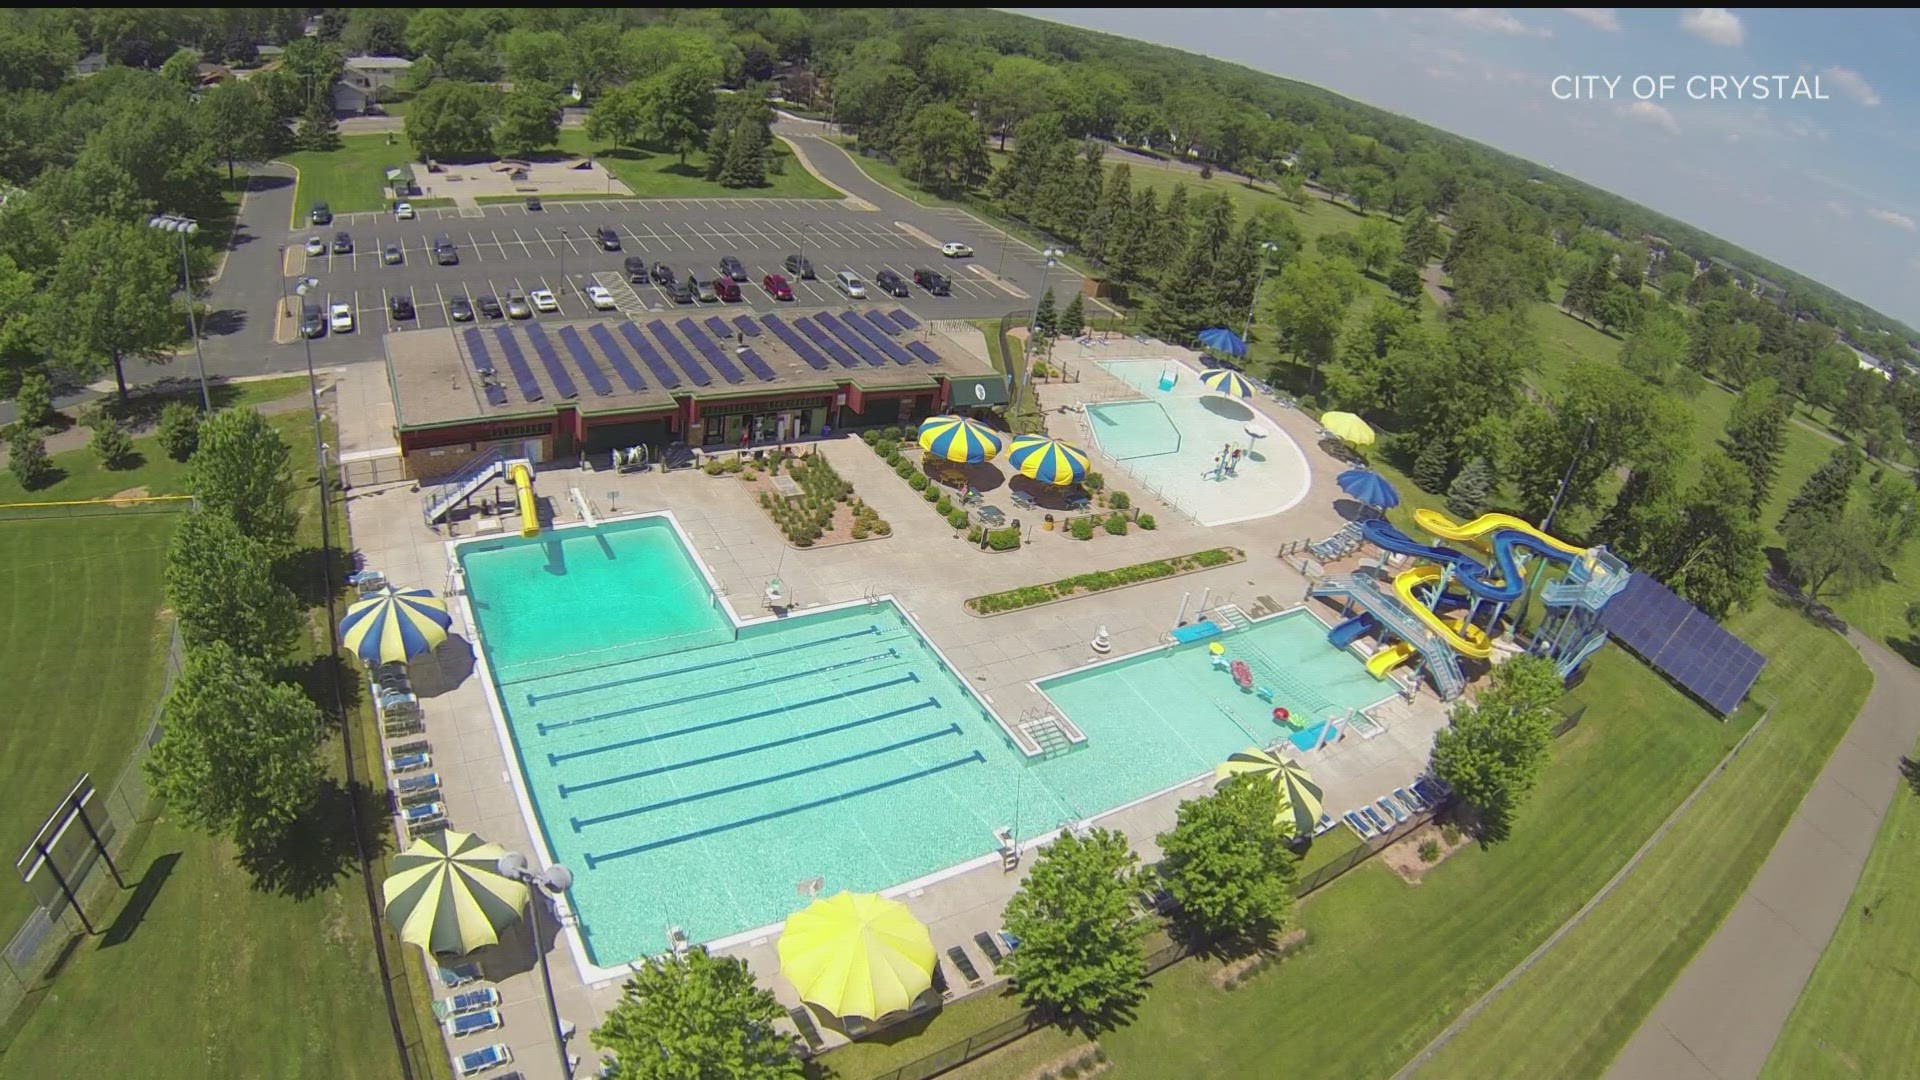 City officials say an online survey shows 95% of residents support using city funding to fix the pool.